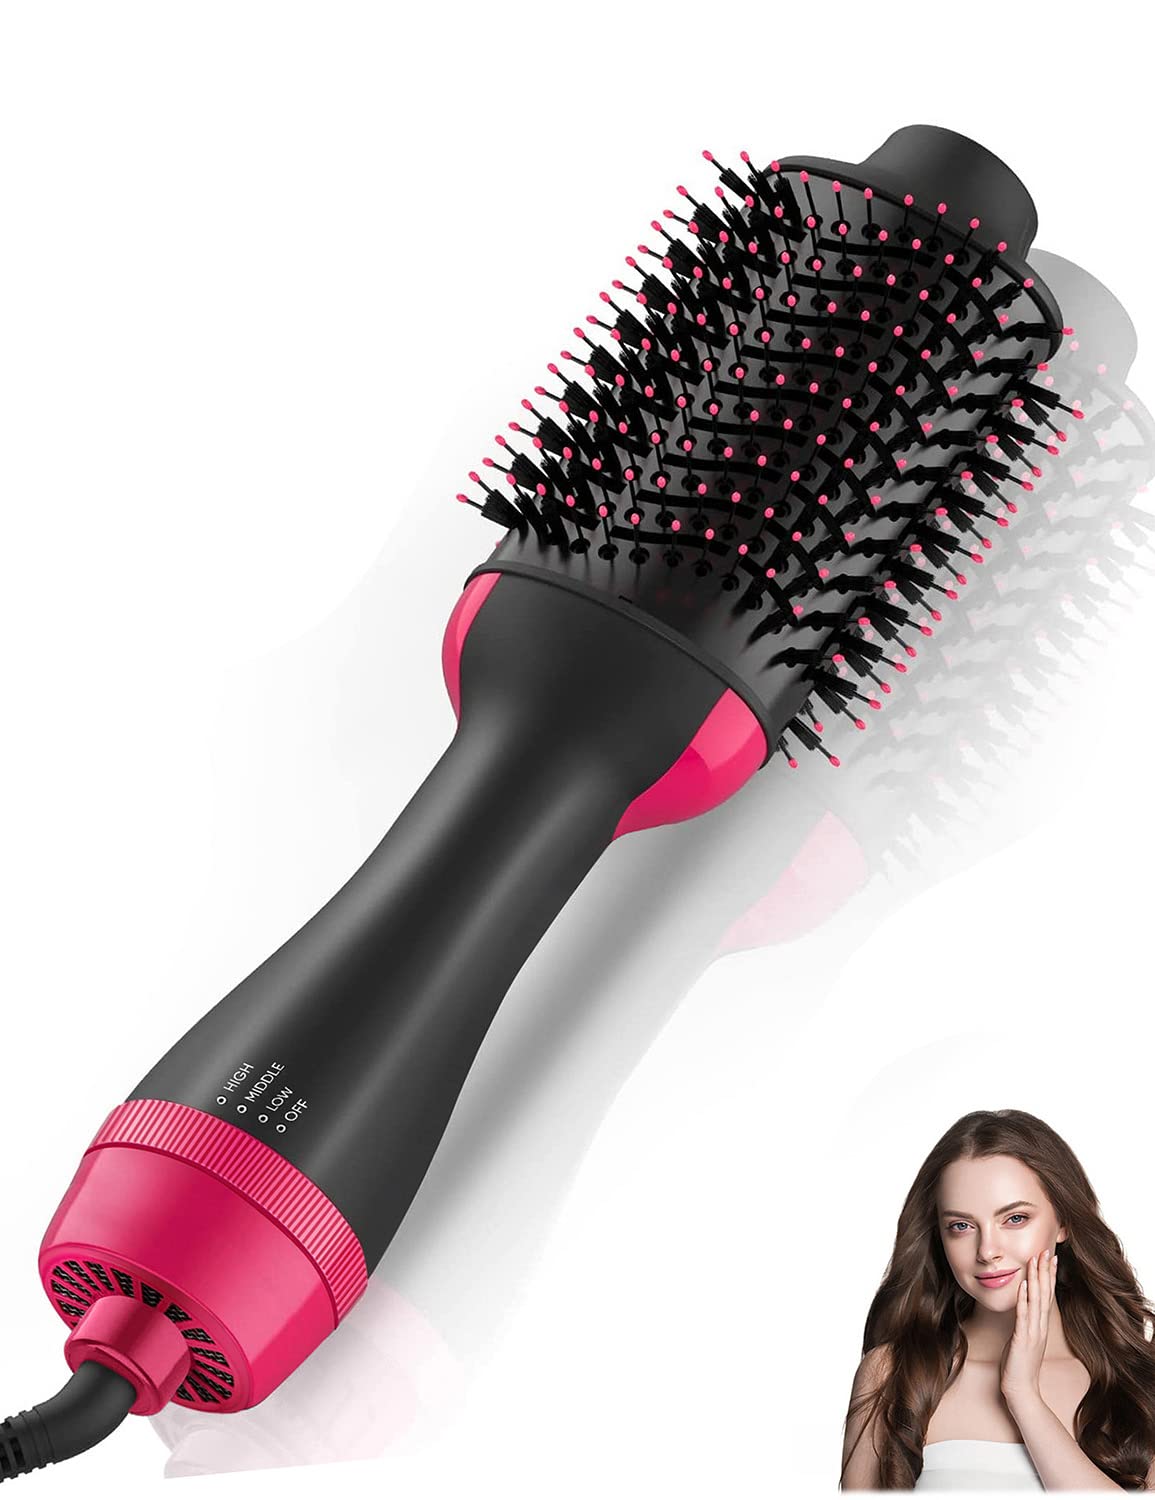 Hair Dryer Blow Dryer Brush, Hair Dryer and Styler Volumizer, Hot Air Brush for Straightening, Curling, Drying, Salon, One Step Styling Tools Pink